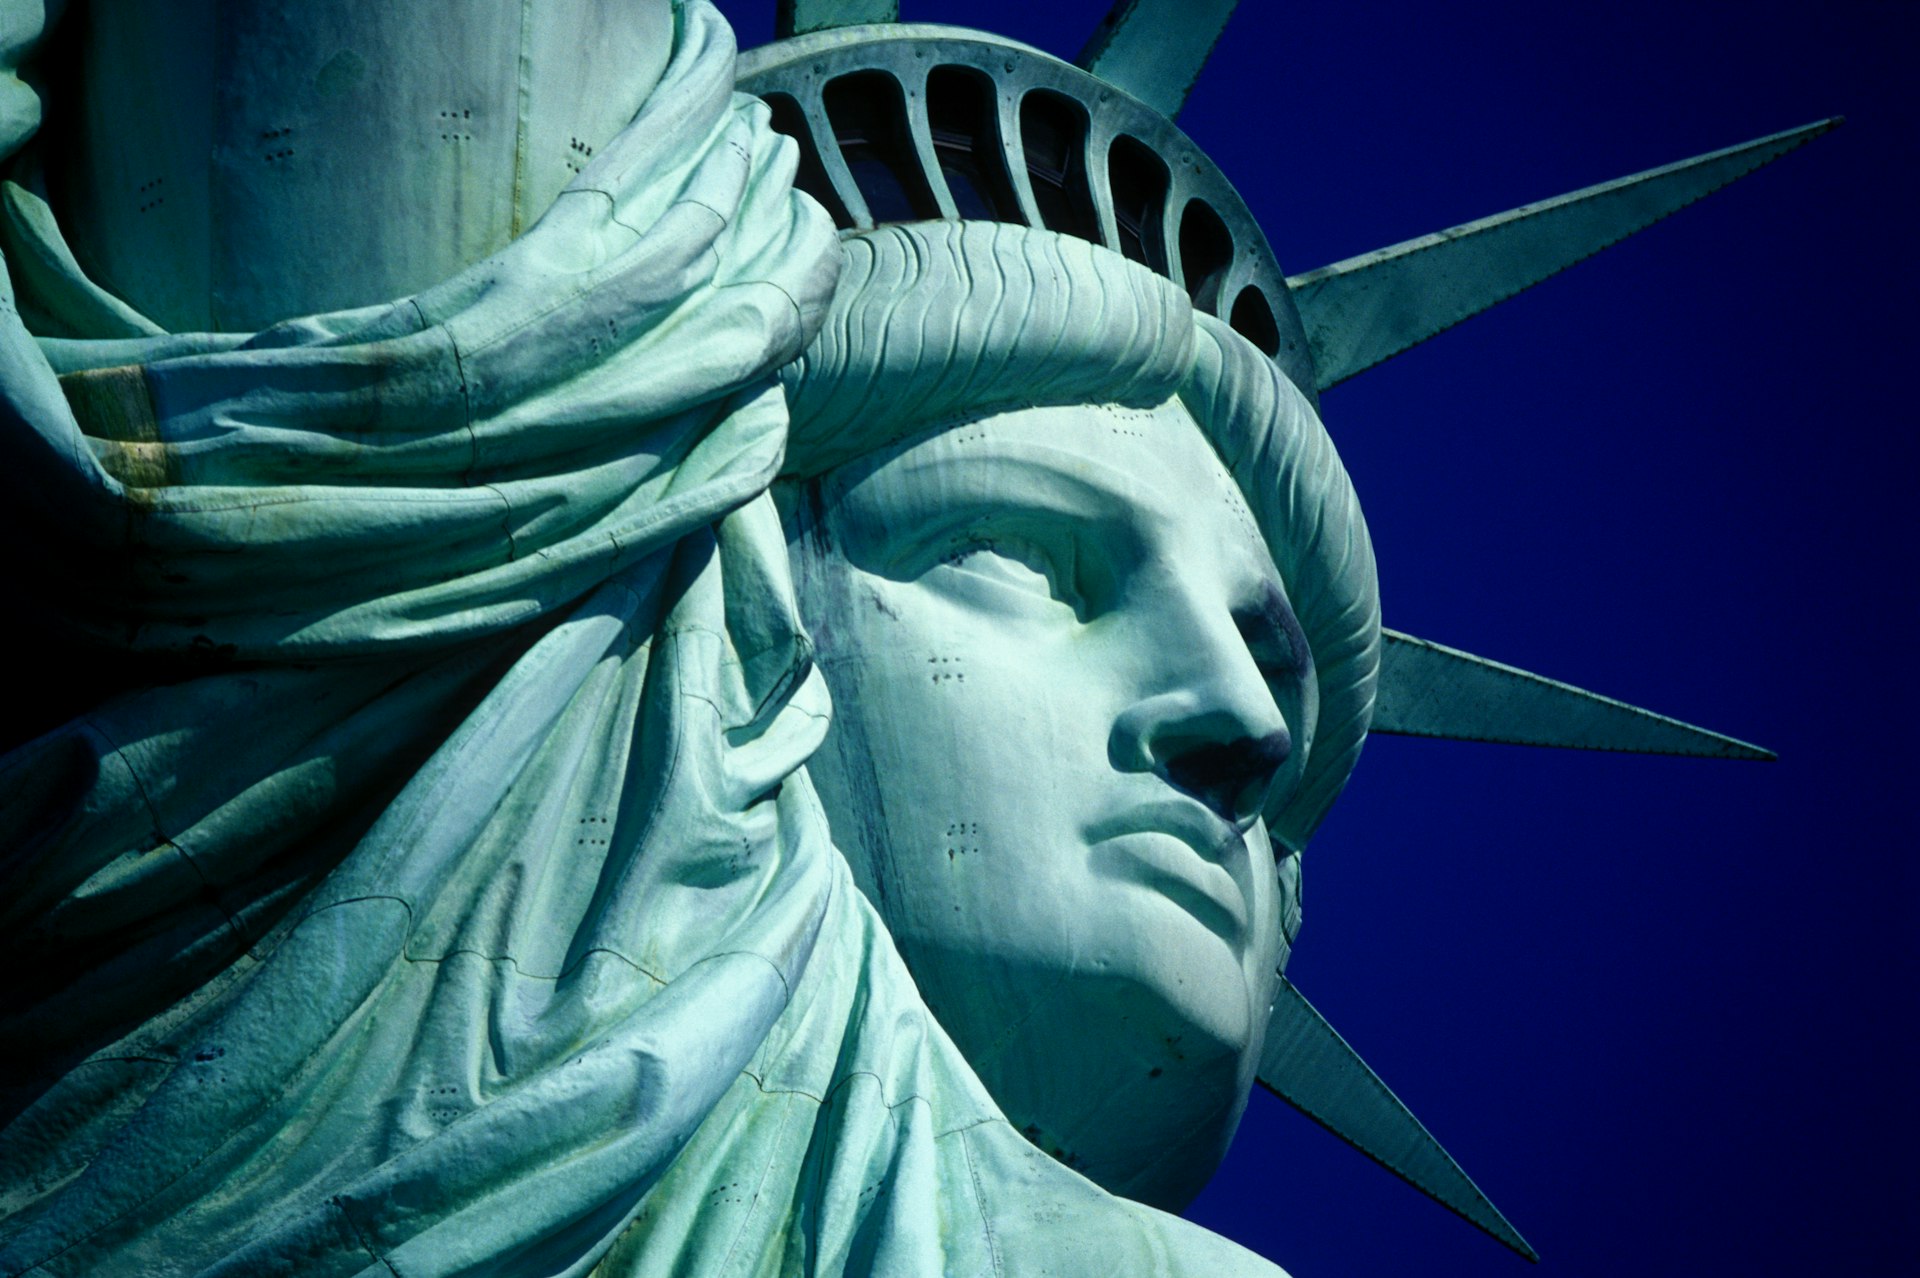 Cropped, up close photo of the Statue of Liberty's face and crown cut against a clear blue sky